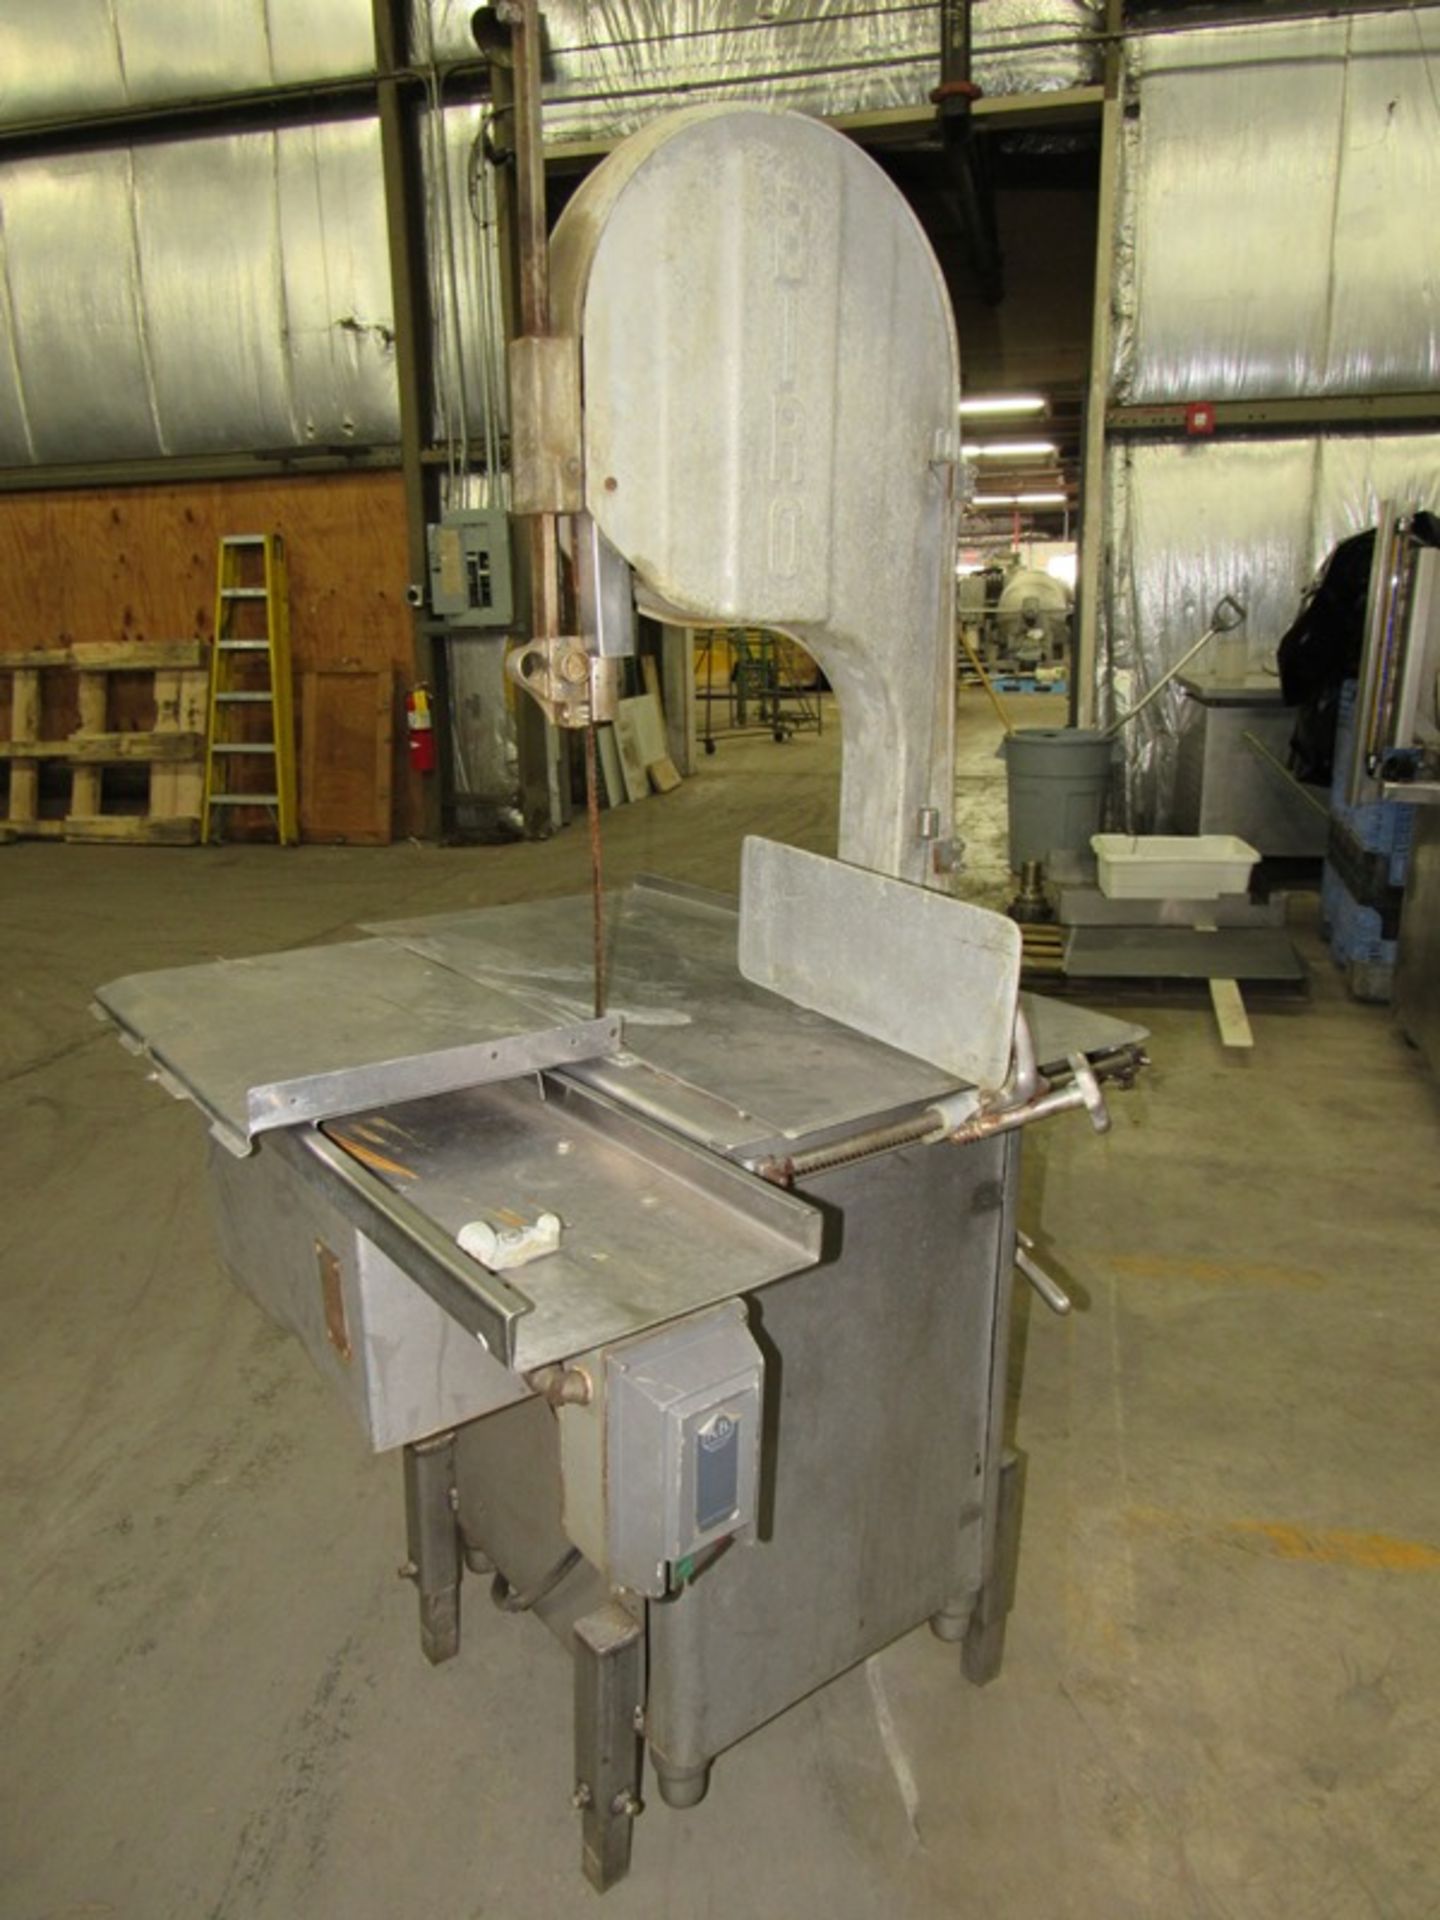 Biro Mdl. 3334 Band Saw, 16" max cutting area, stainless steel table, 220 volts, 3 phase, Ser. #